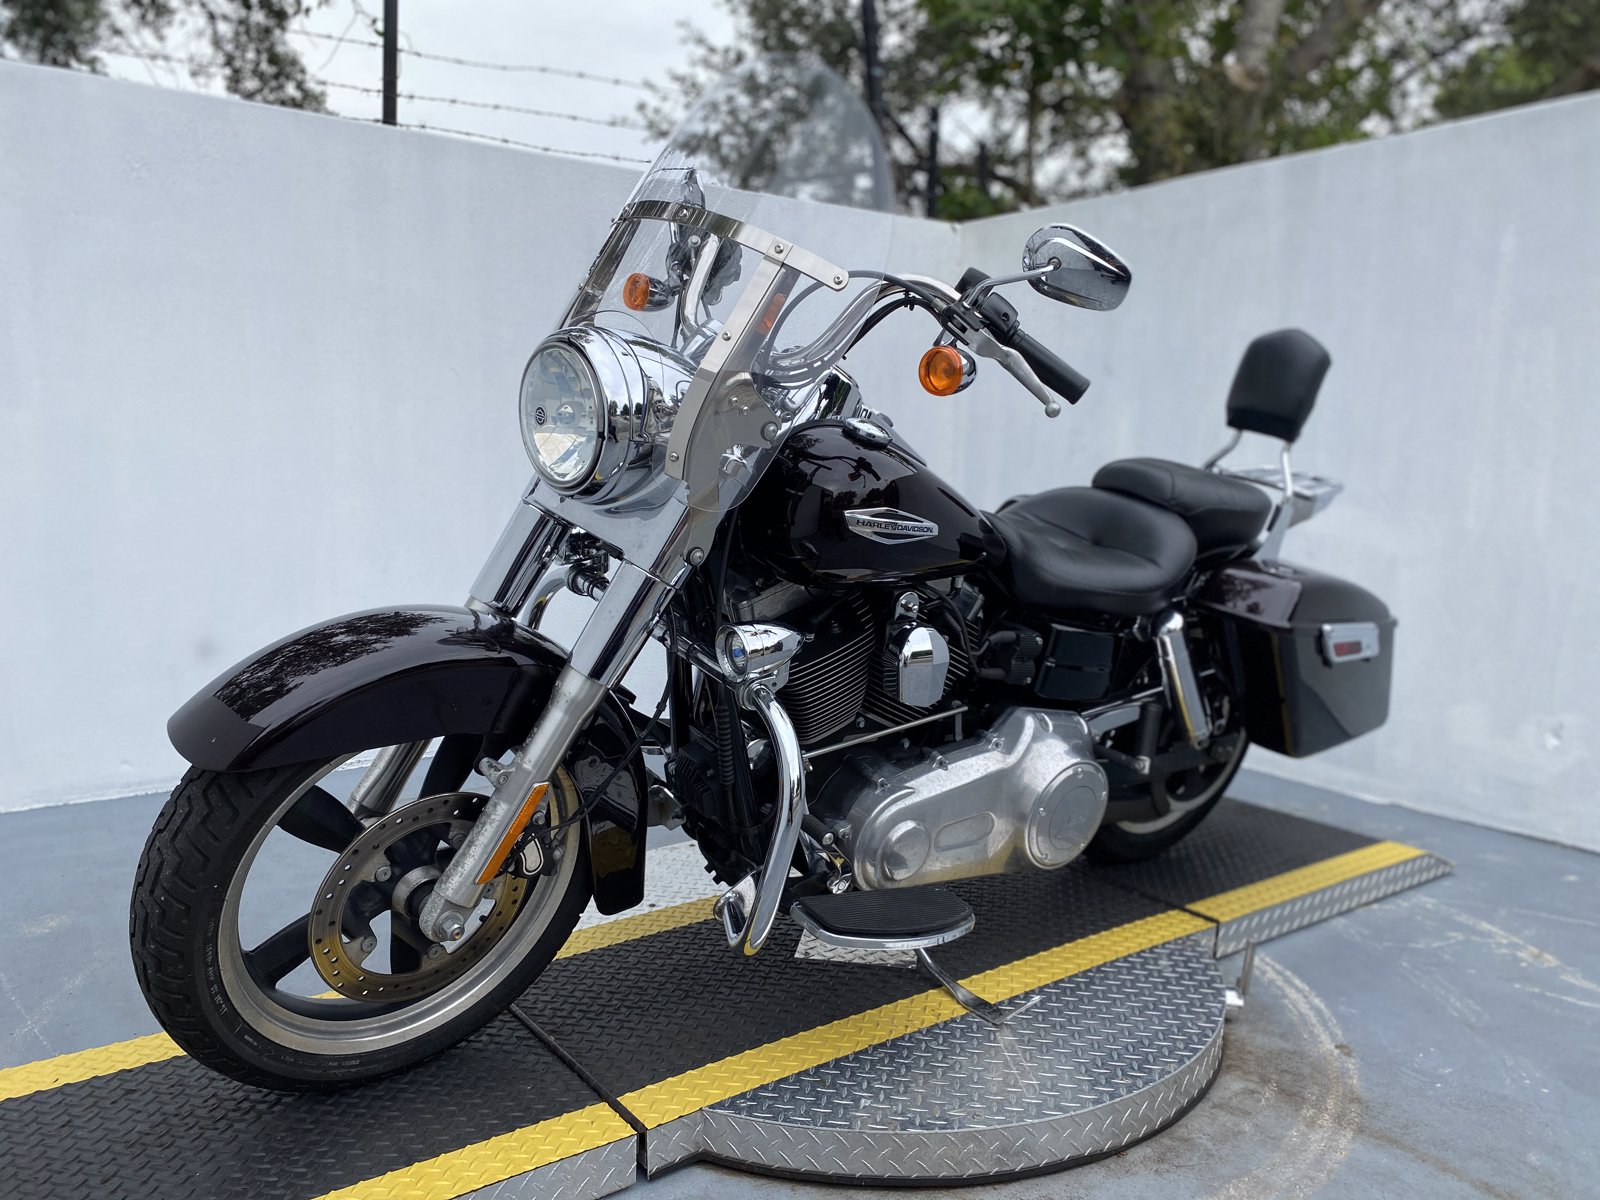 Pre-Owned 2014 Harley-Davidson Dyna Switchback FLD Dyna in Fort Myers #